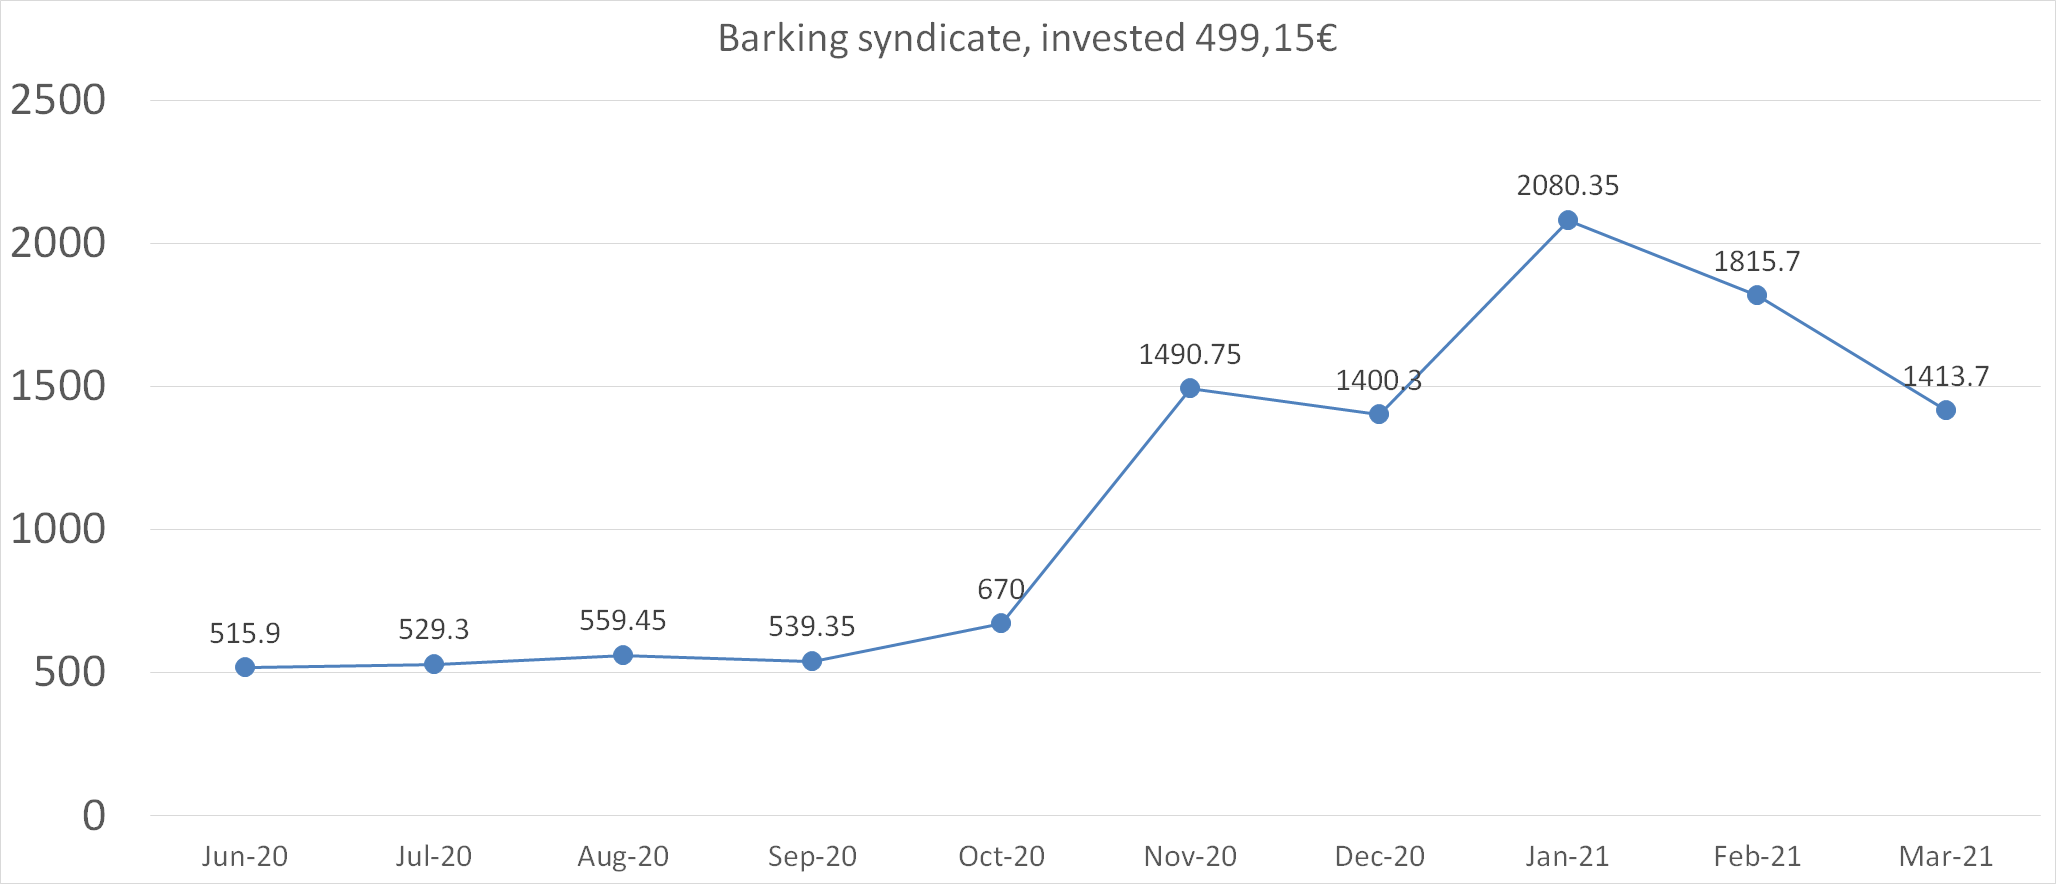 Barking syndicate worth march 2021